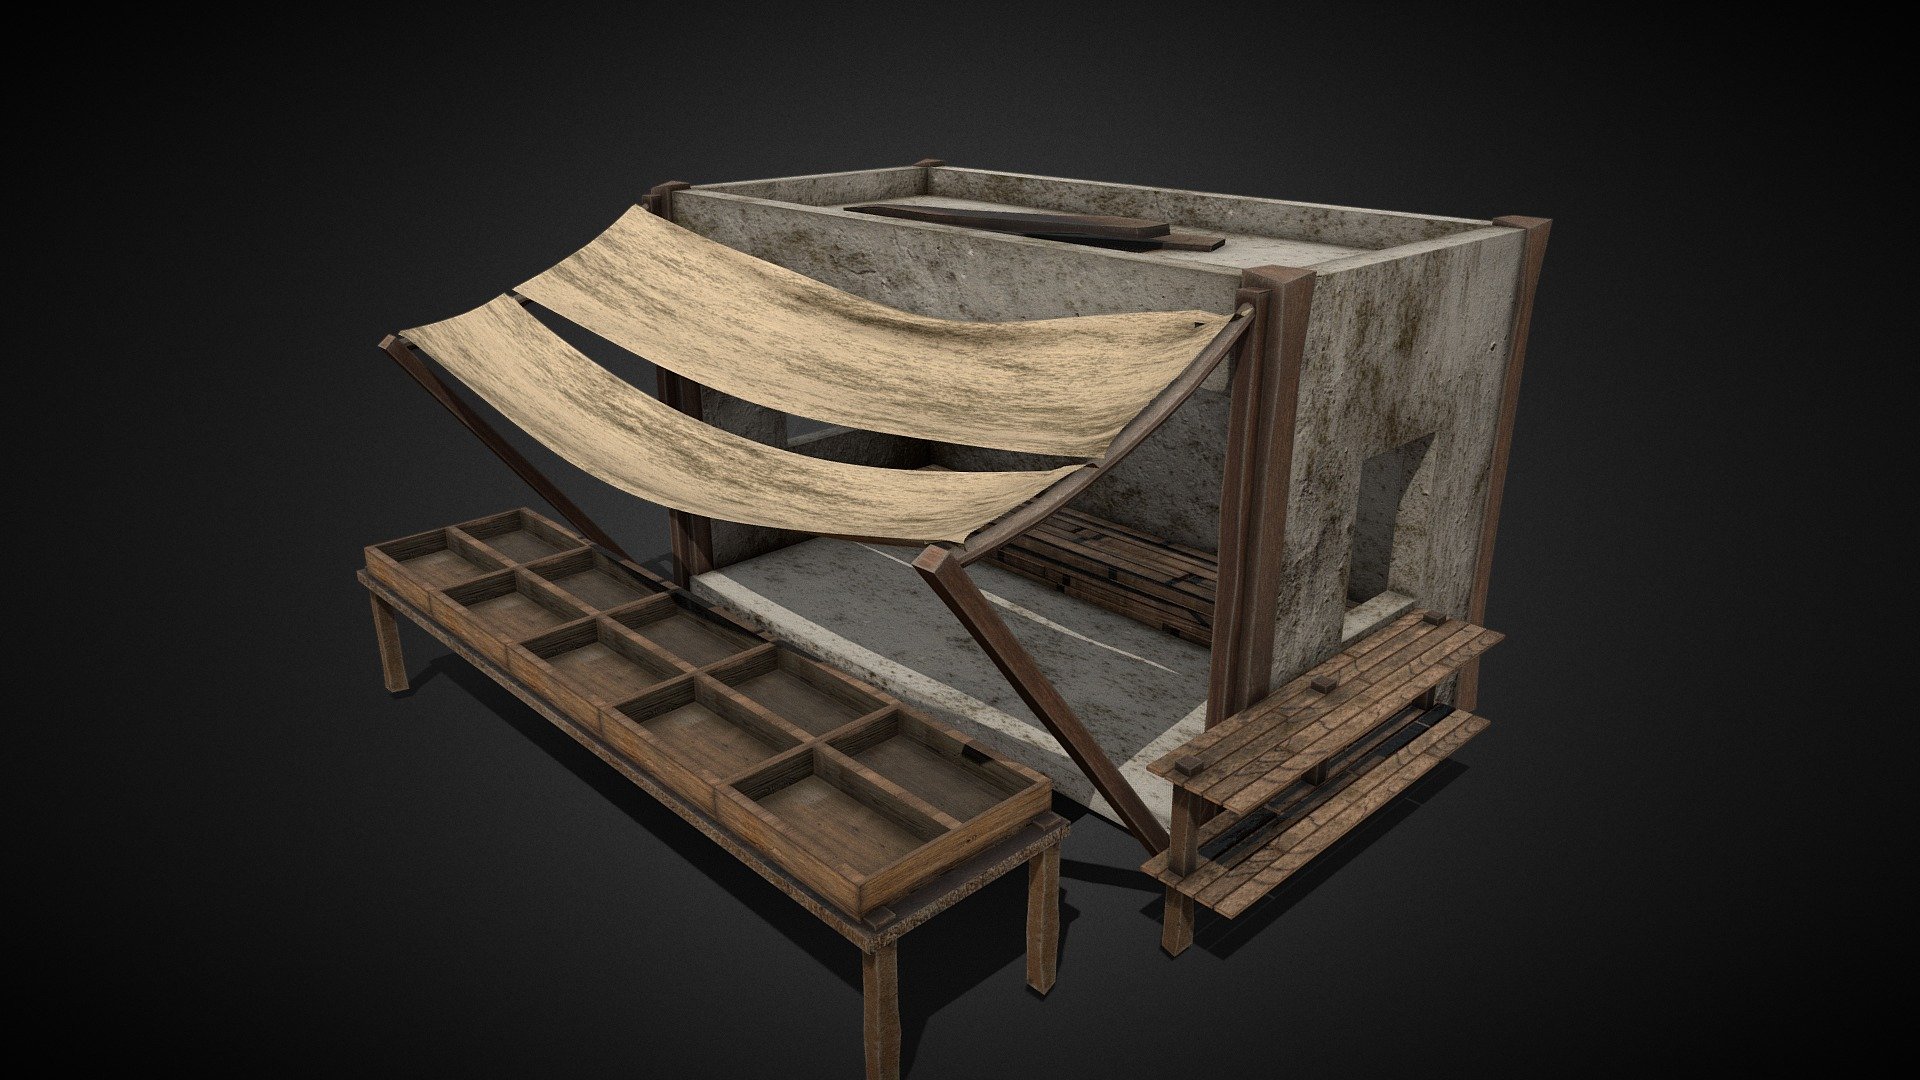 Reference Game Asset From Stronghold

The market is a one-time building, which provides access to trading raw materials, food and other commodities. Gold is exchanged in return, and a respective storage place (most of the time, stockpile, armoury or granary) with enough space has to be built in order to complete a transaction.

Create With Blender And Substance Painter

Note : You can email me if you need something or you need the blender file - Marketplace Medieval Game Asset - Buy Royalty Free 3D model by solodevelopment97 3d model